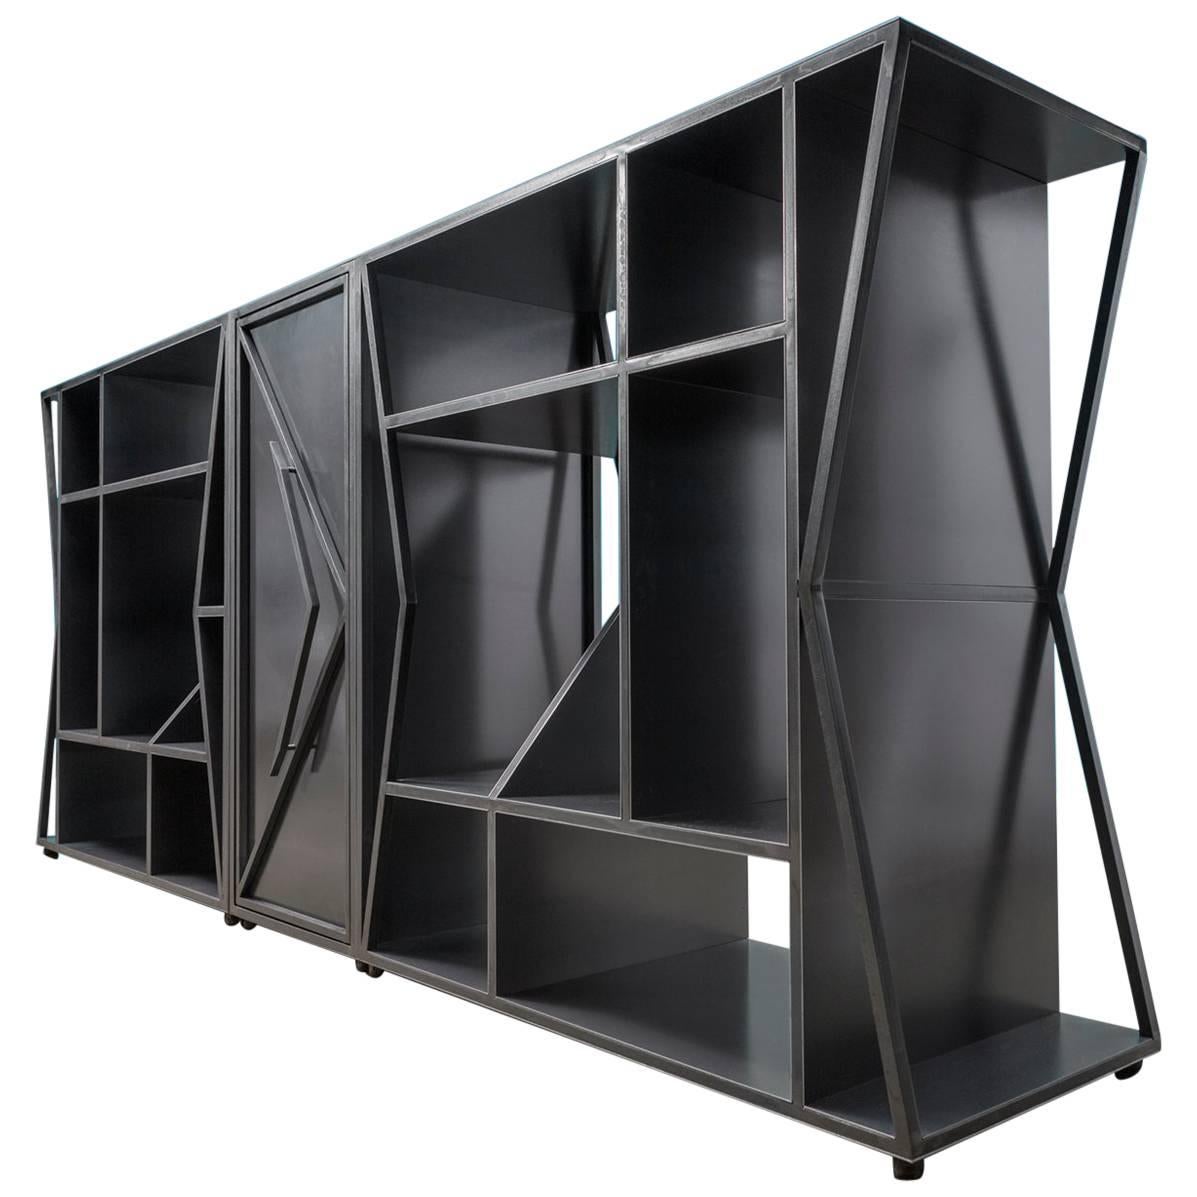 Meridian Modular Credenza, Trio, Modern Steel Etagere Cabinet, by Force/Collide For Sale